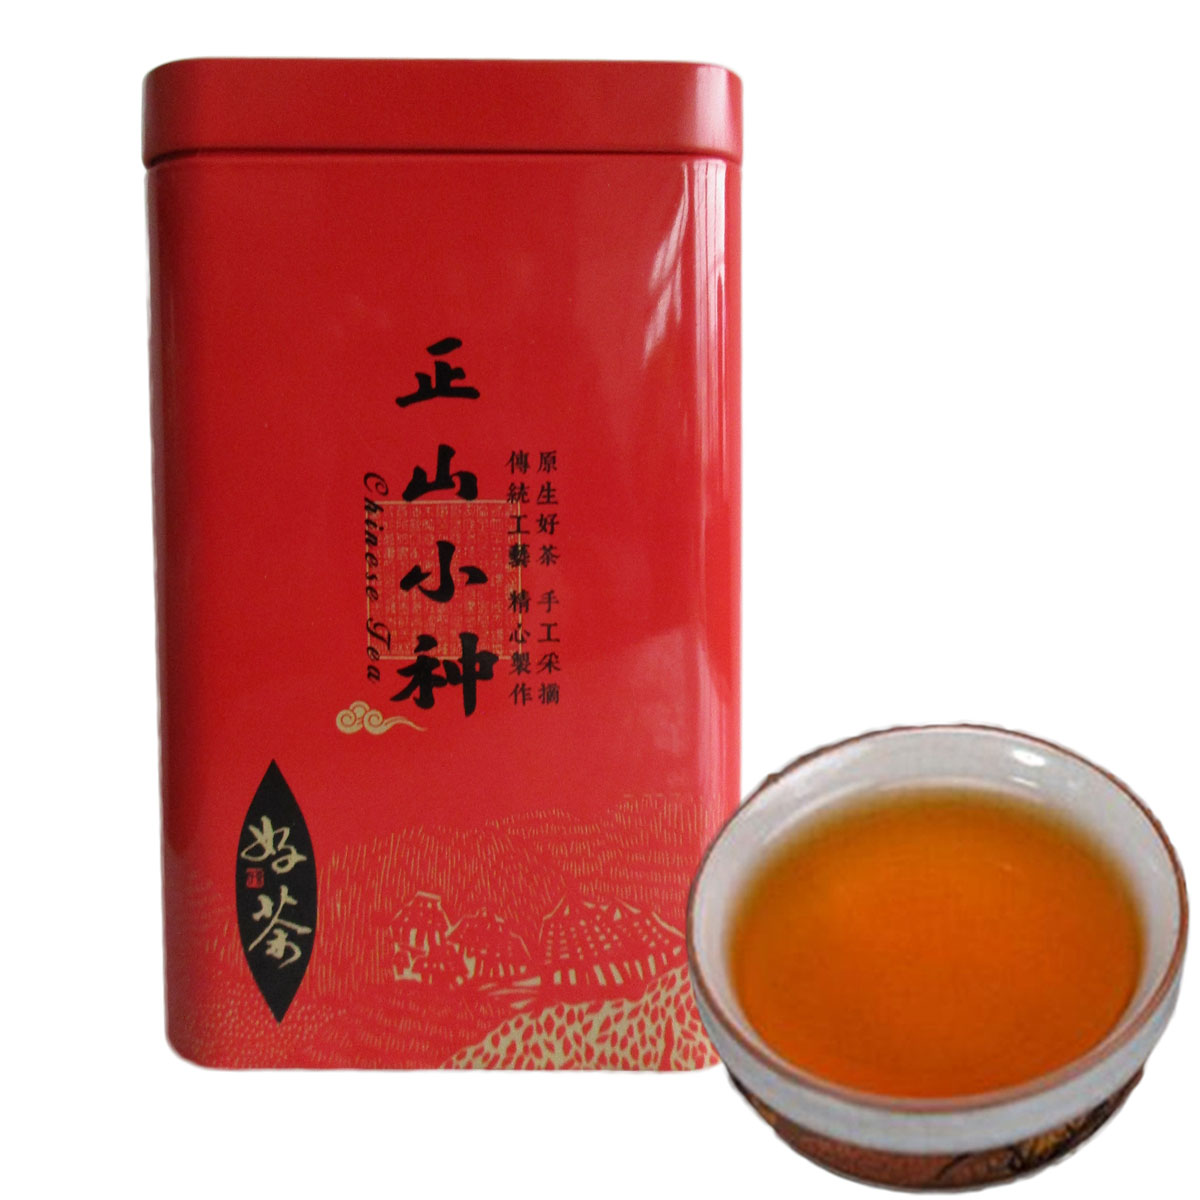 

Chinese Organic Black Tea Lapsang Souchong Superior Oolong Red Tea 200g Total Weight Health Care New Cooked Tea Green Food Gift Package